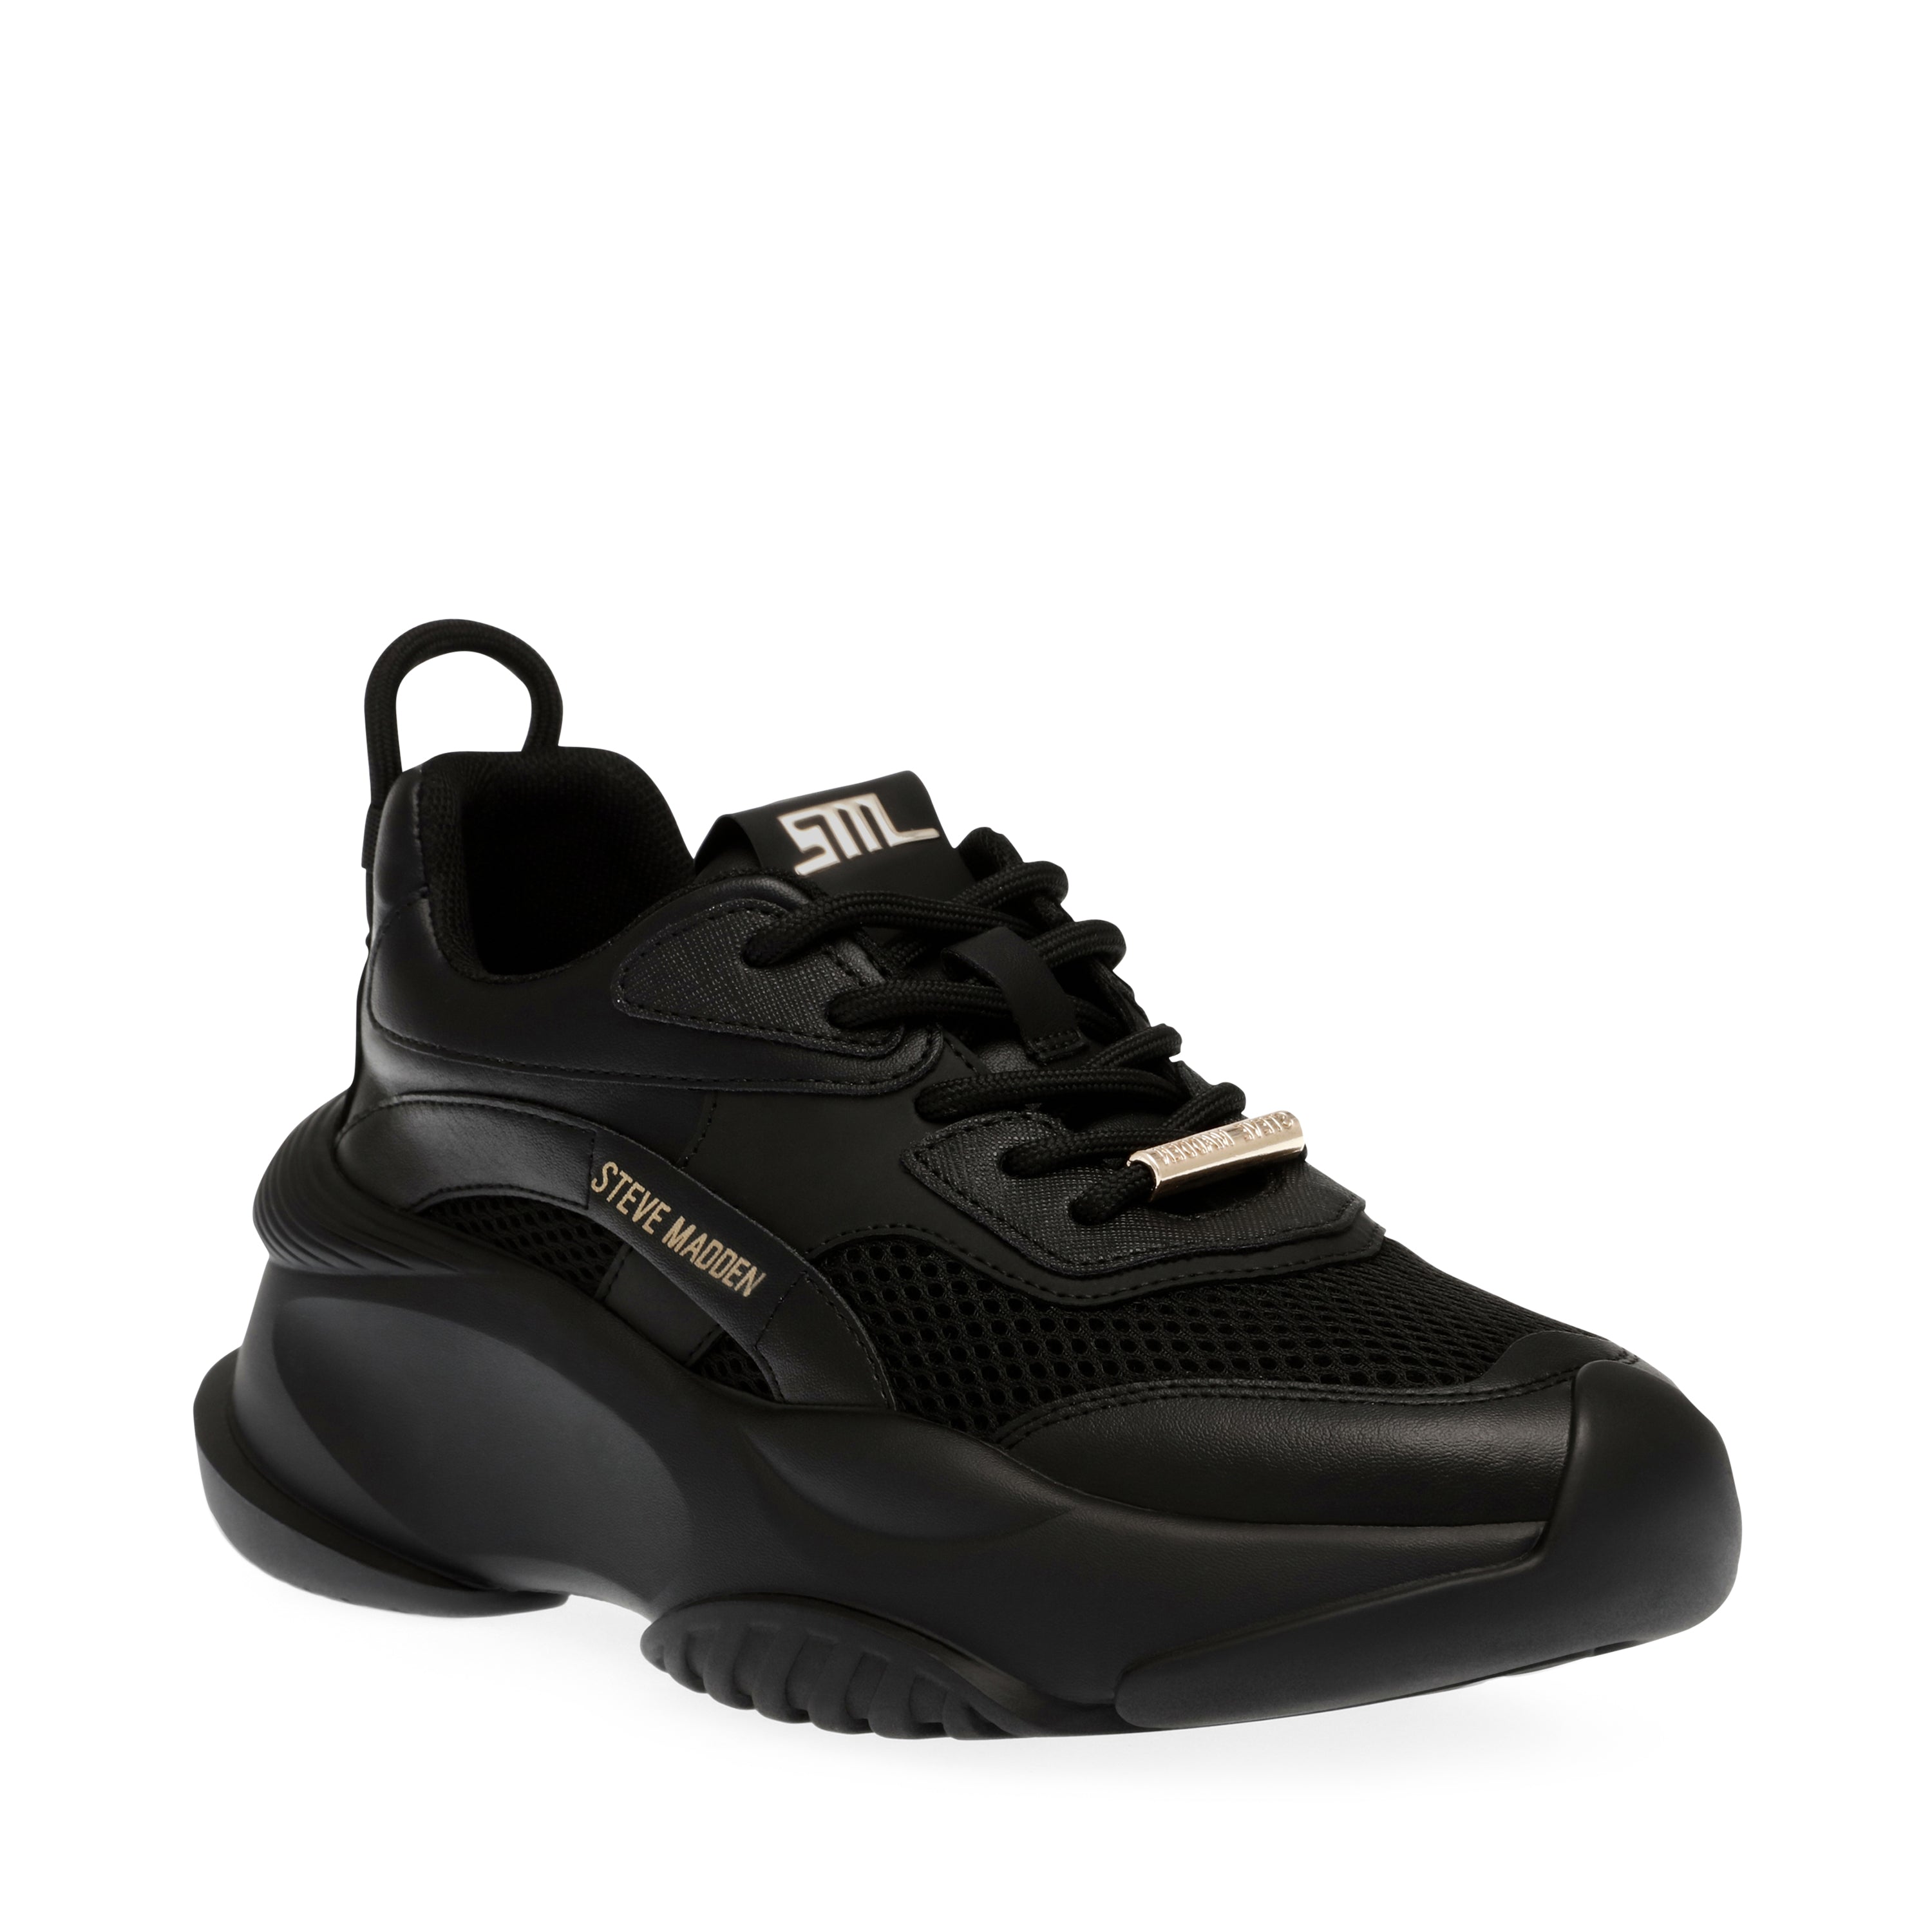 BELISSIMO BLACK/GOLD SNEAKERS- Hover Image